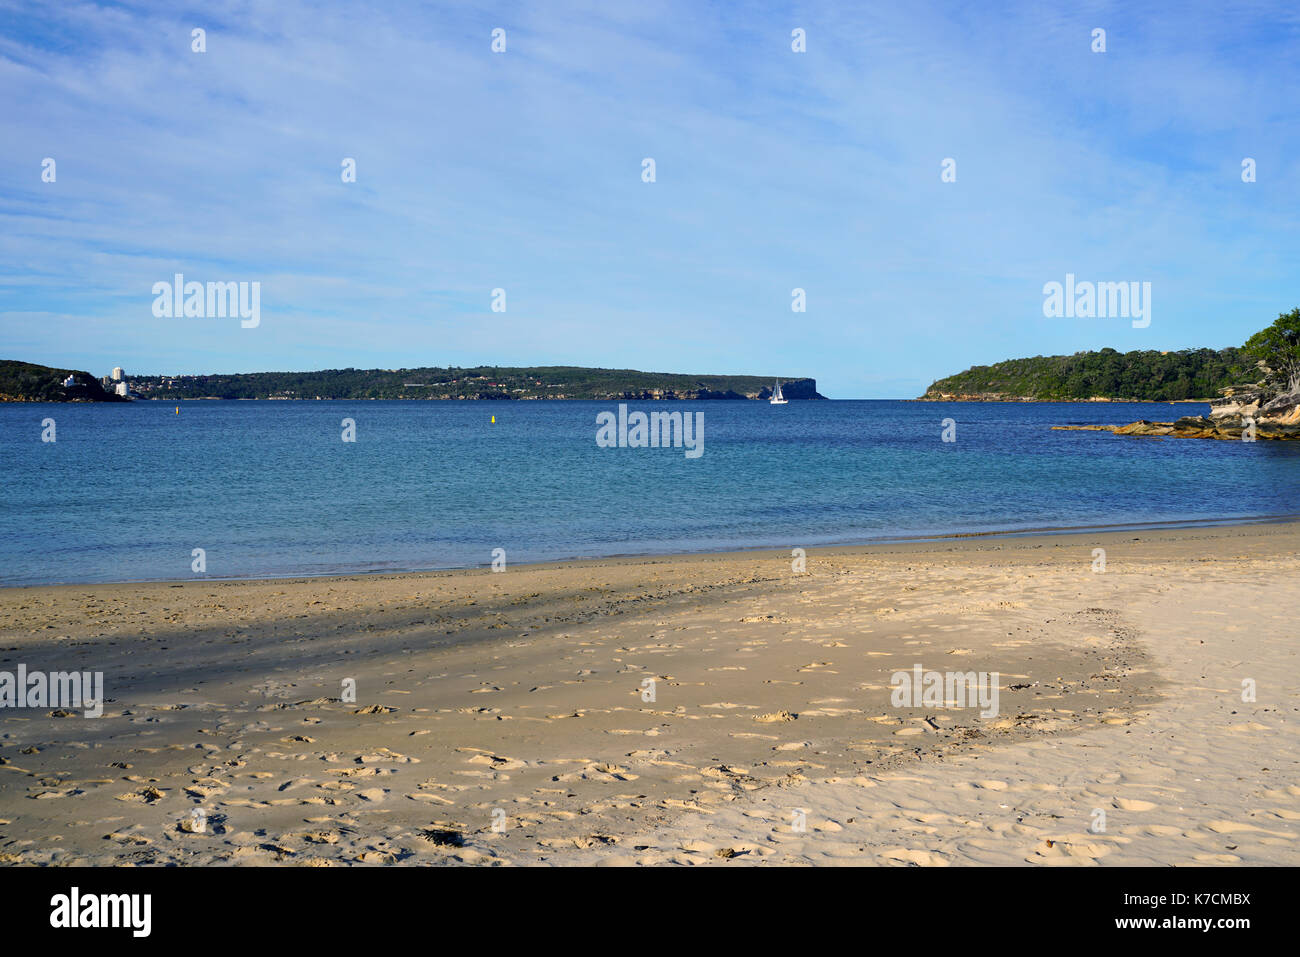 View of the Balmoral Beach in Mosman, Sydney, New South Wales, Australia. Stock Photo